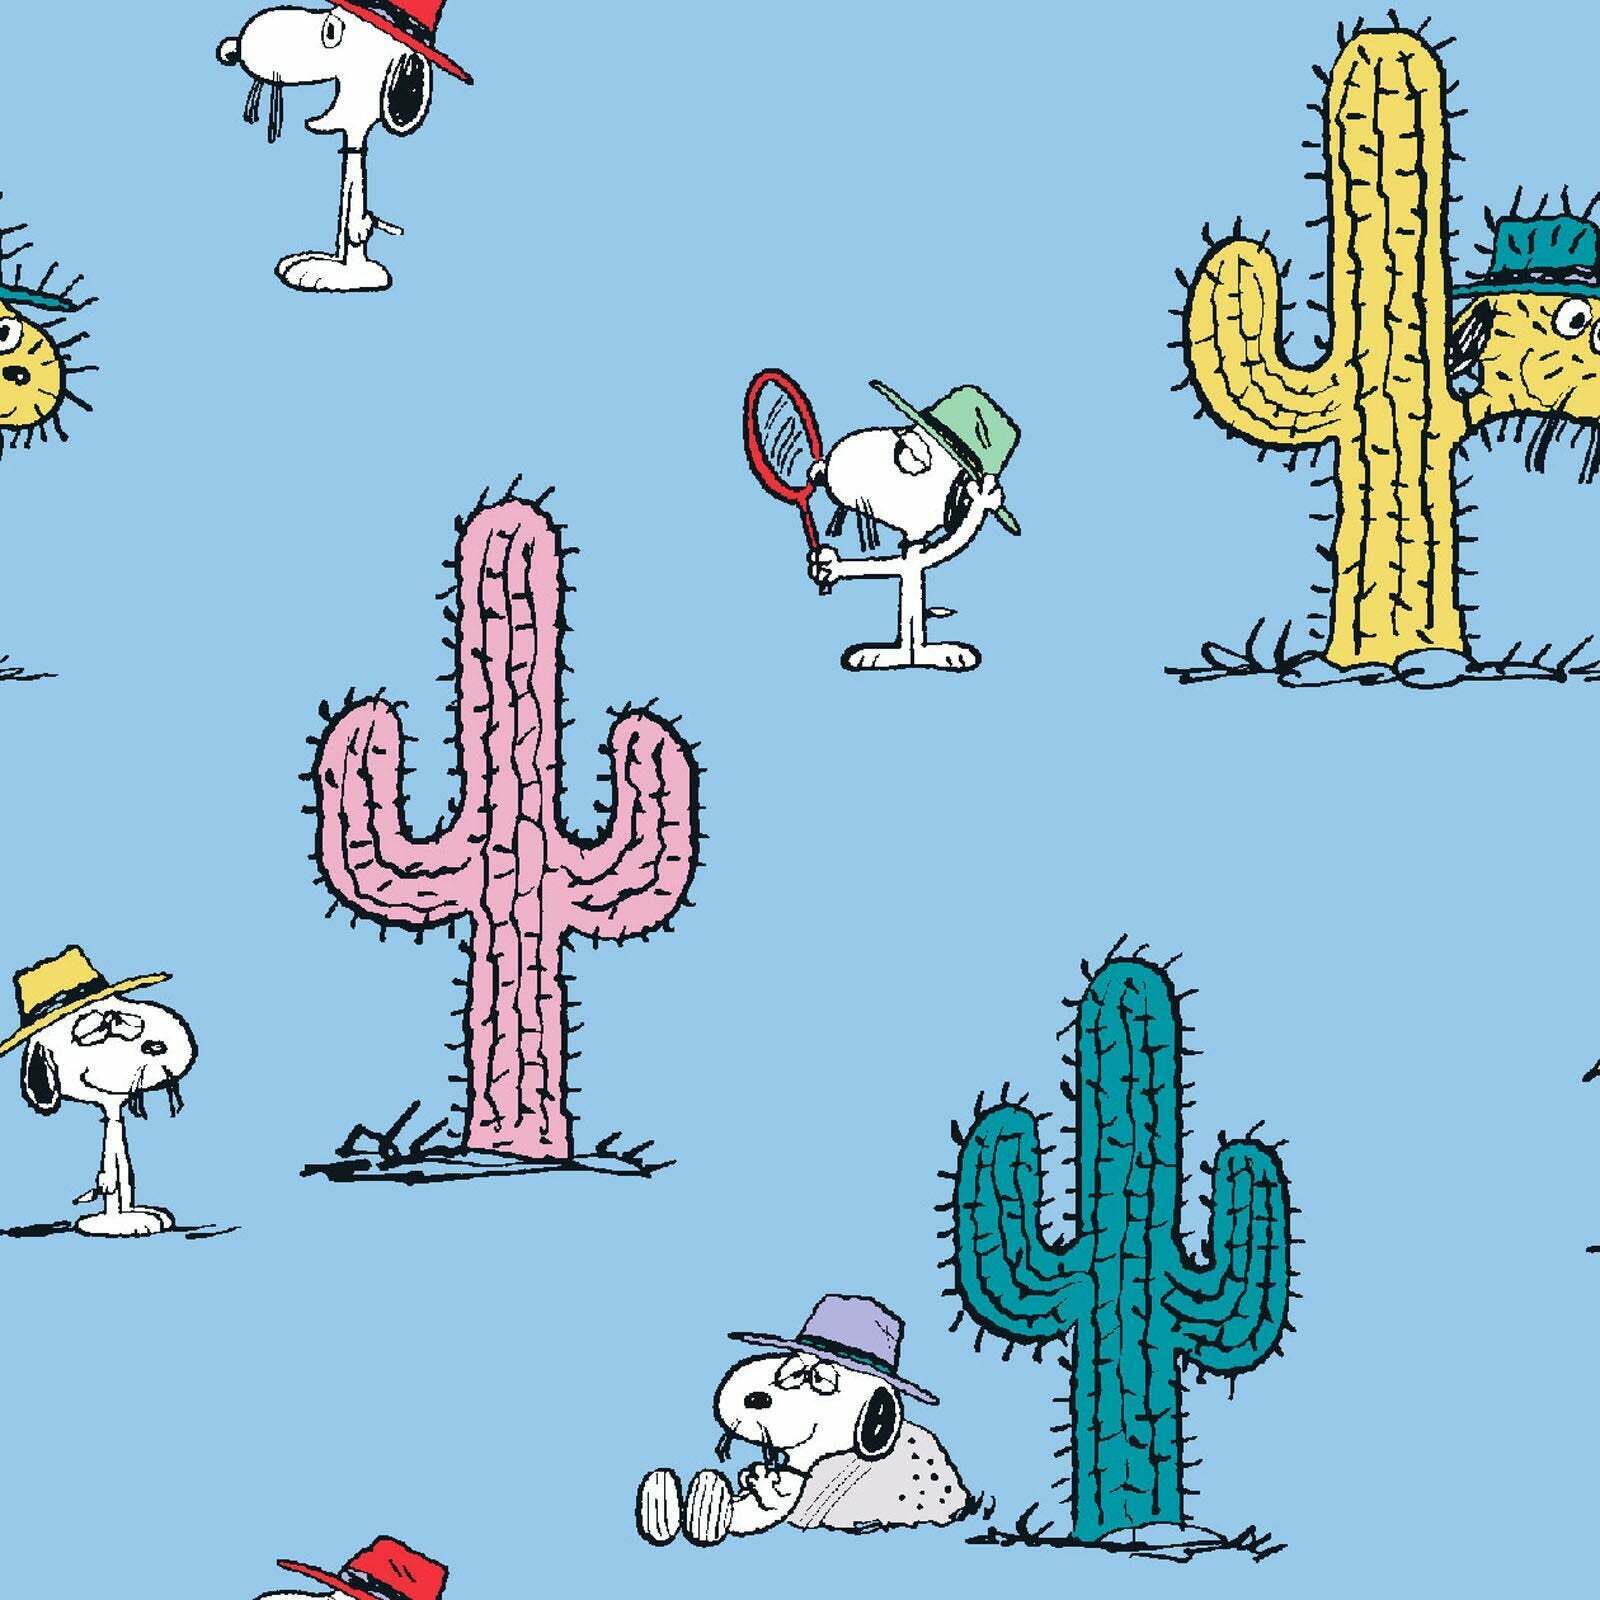 Snoopy And Cacti 68131 Blue Springs Creative 100% Cotton Fabric By The Yard - image 1 of 1